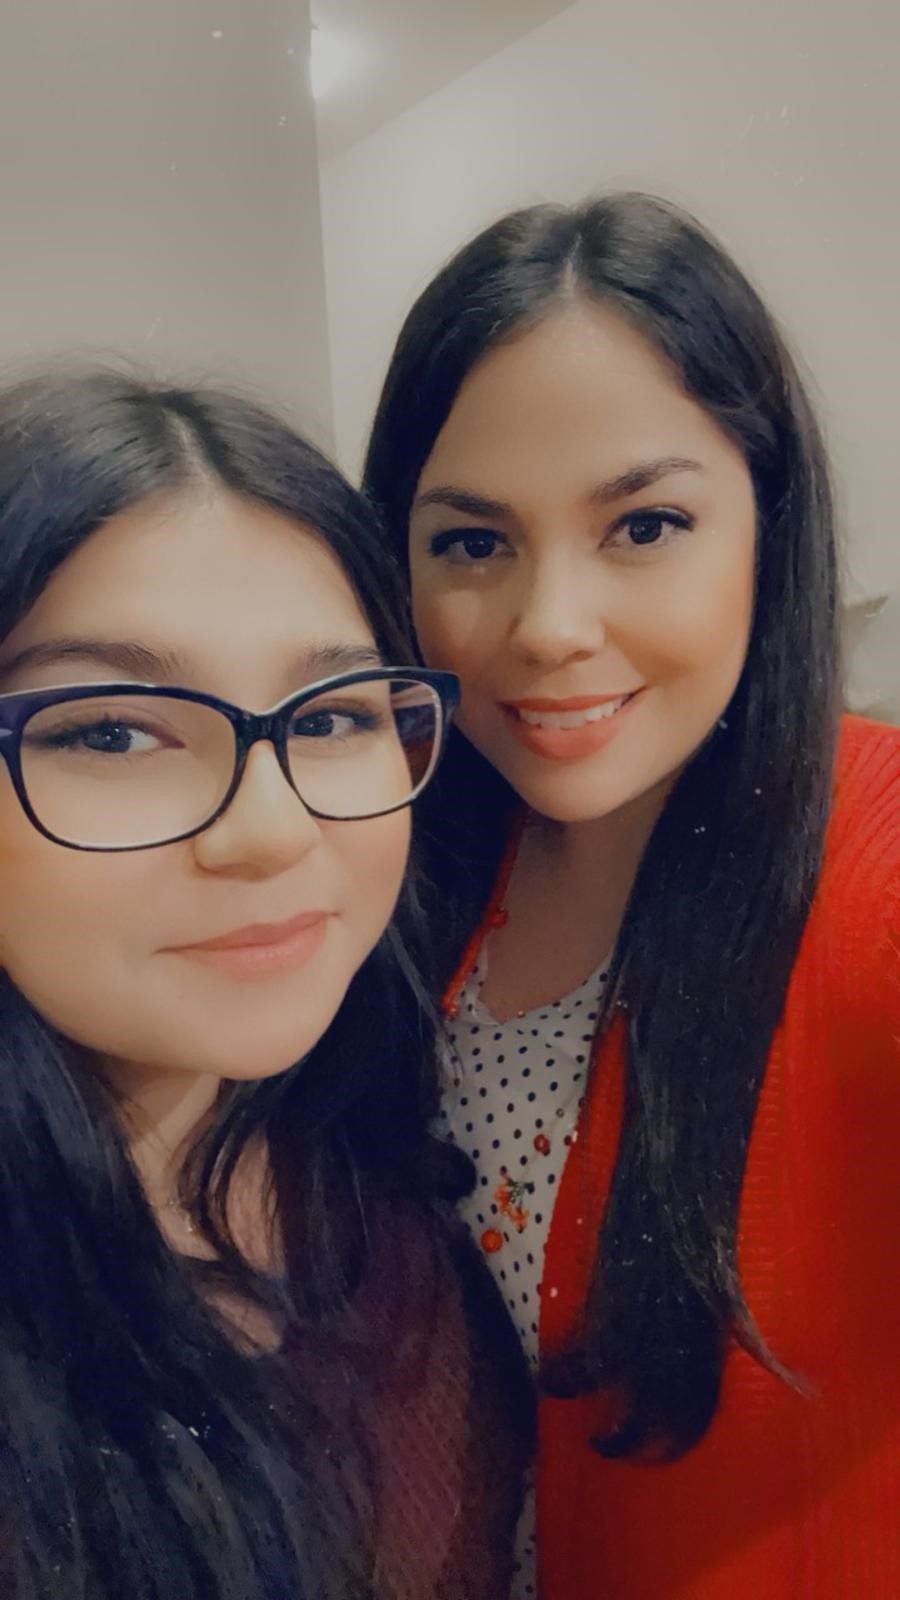 Marcy Hurtado and her daughter